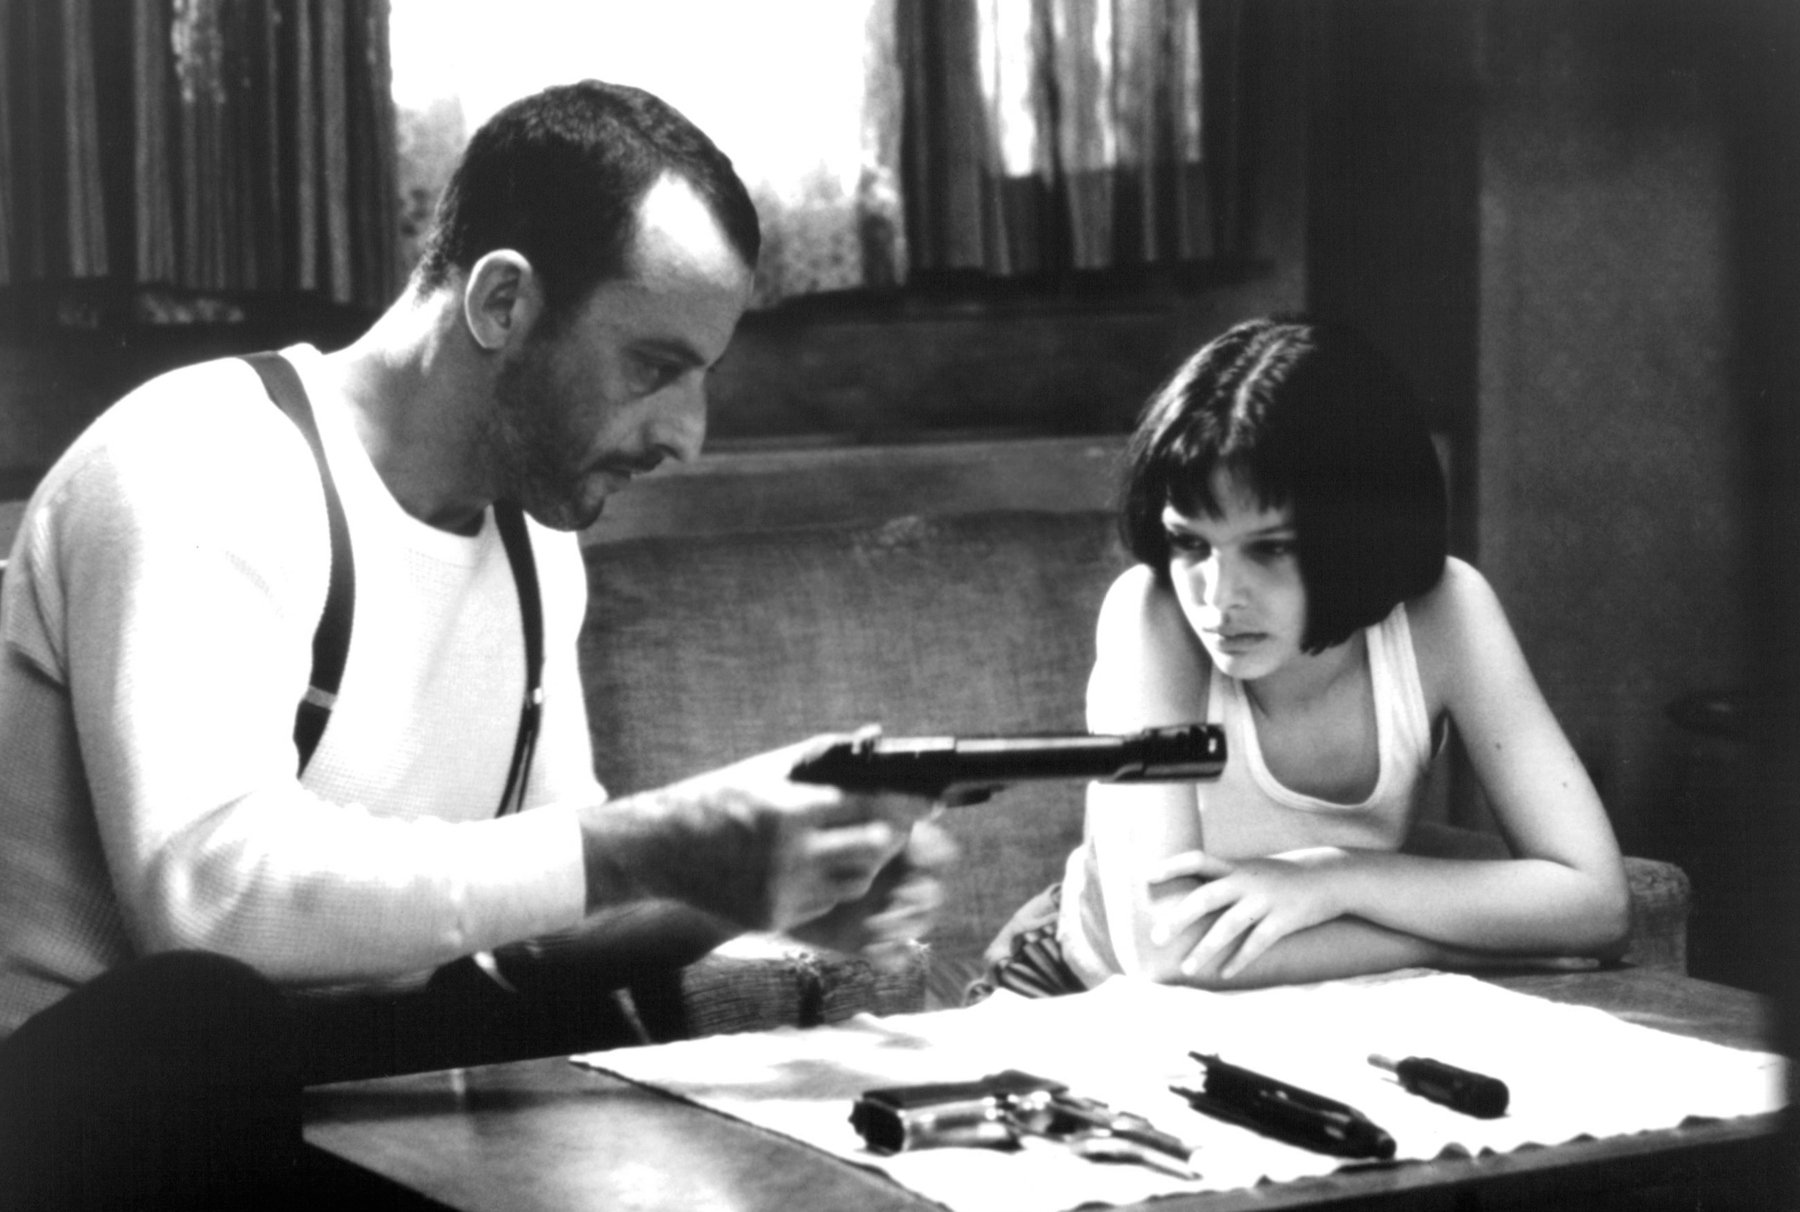 Jean Reno loads a gun in front of Natalie Portman in a scene from the film 'Léon: The Professional', 1994